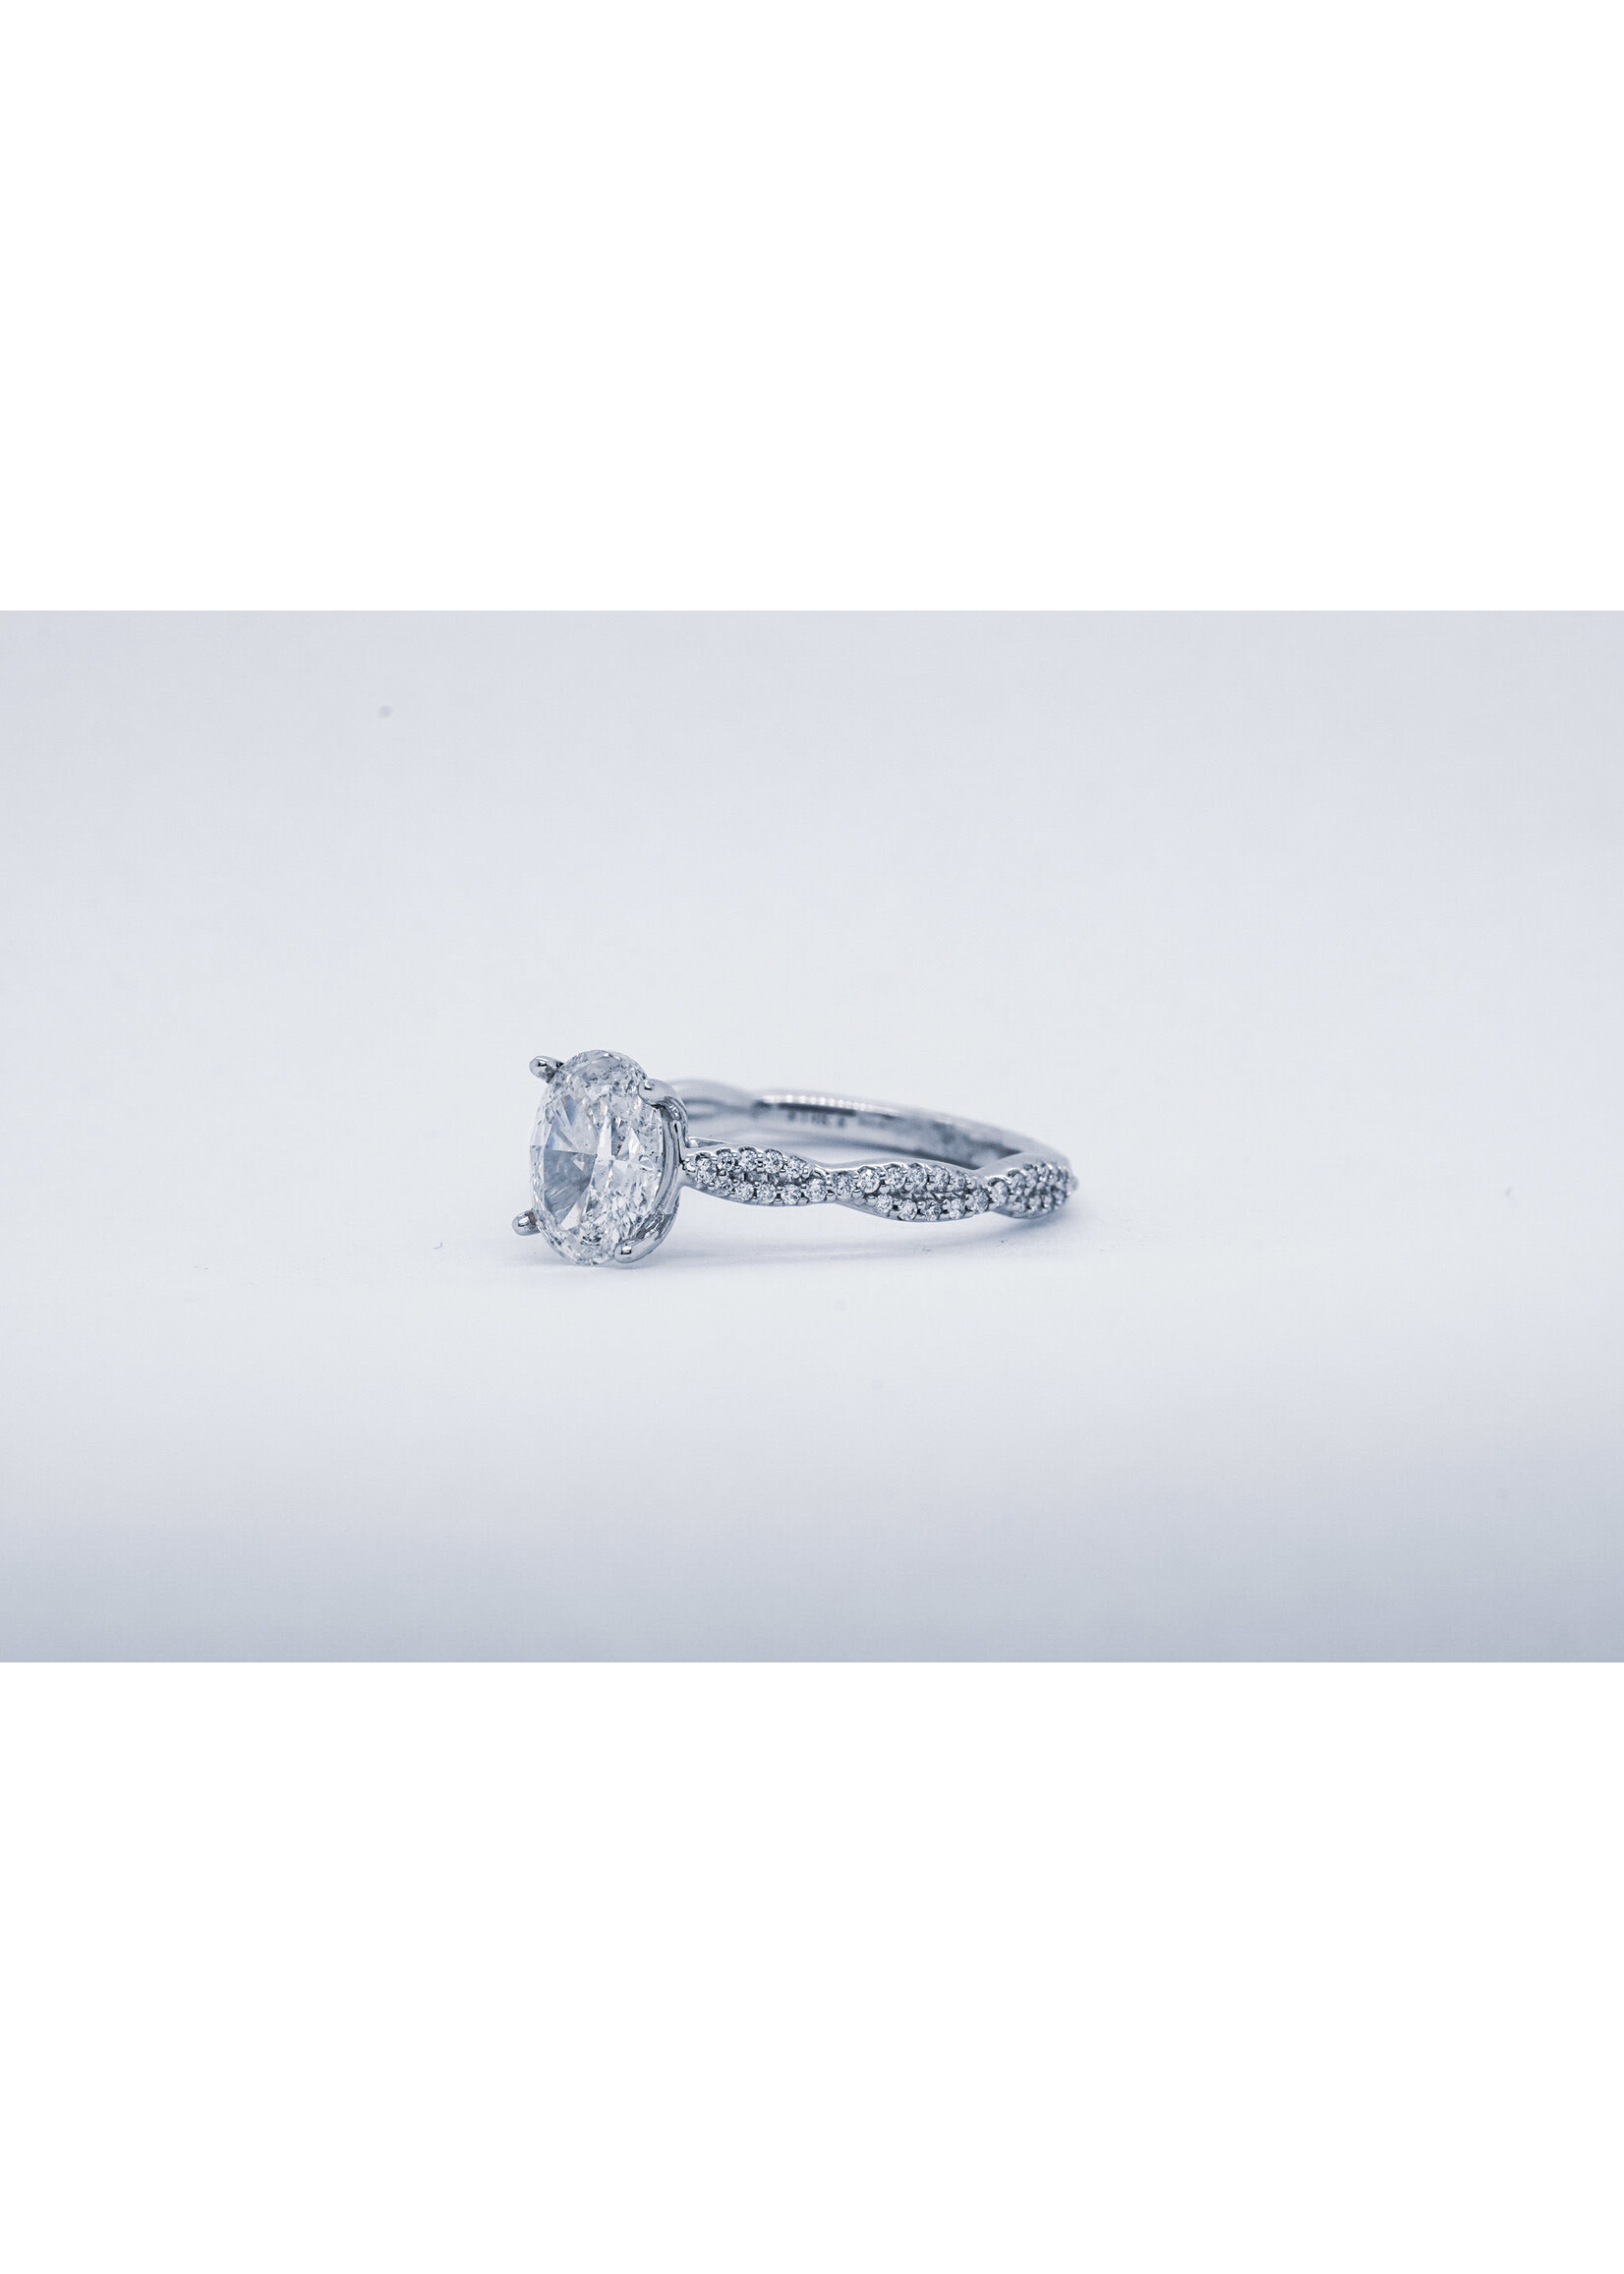 14KW 3.22g 1.91ctw (1.51ctr) F/SI2 EGL Oval Diamond Engagement Ring (size 7)